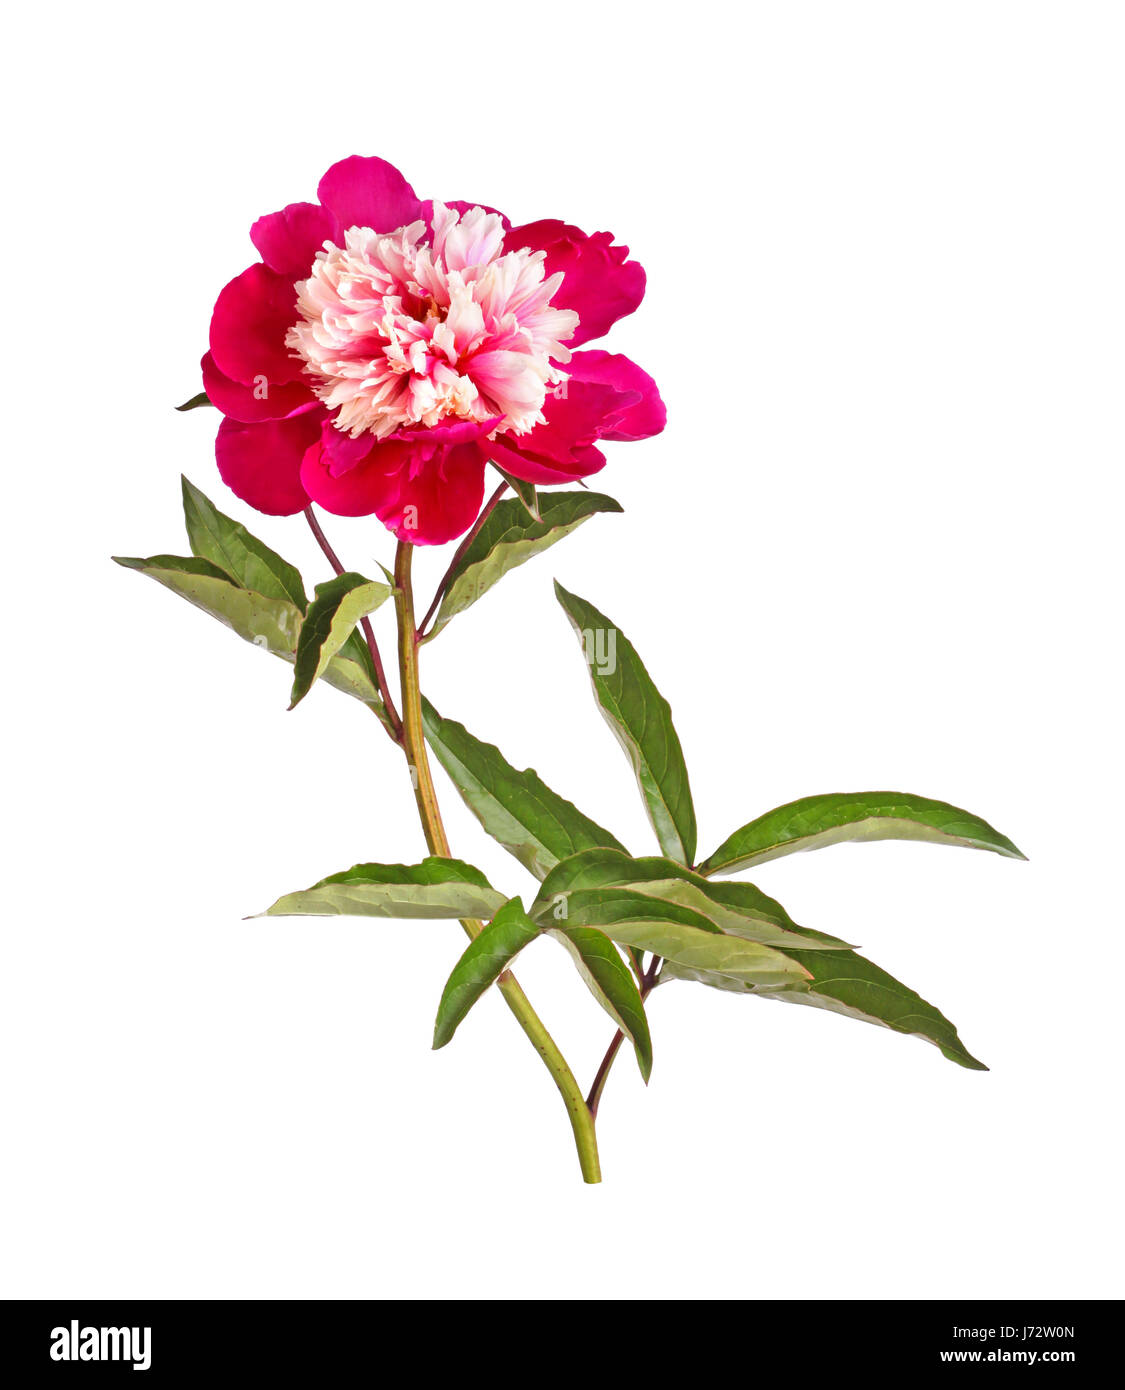 One double anemone-form flower, stem and leaves of a red and white peony (Paeonia lactiflora) cultivar isolated against a white background Stock Photo